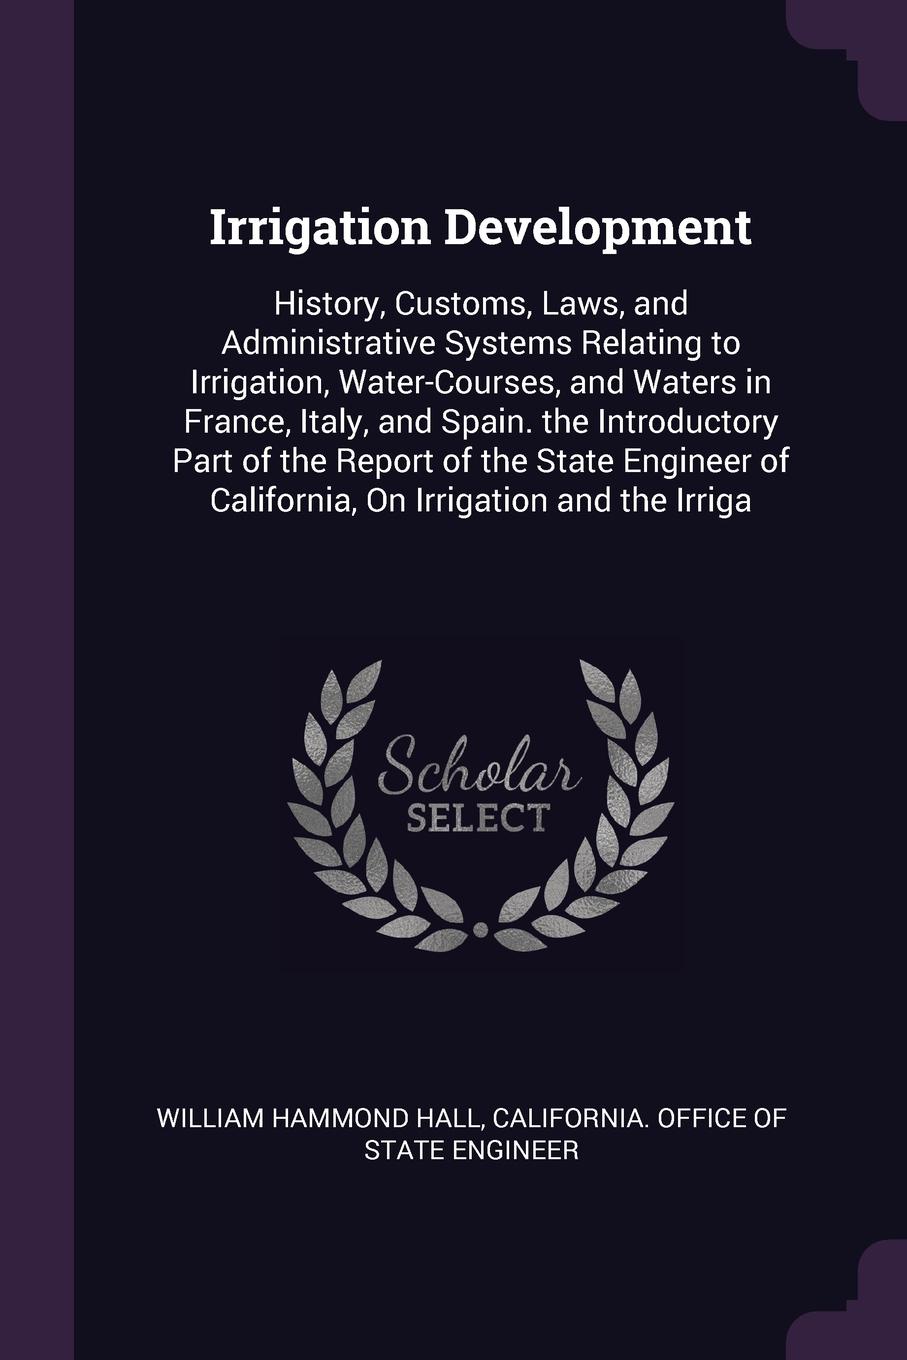 Irrigation Development. History, Customs, Laws, and Administrative Systems Relating to Irrigation, Water-Courses, and Waters in France, Italy, and Spain. the Introductory Part of the Report of the State Engineer of California, On Irrigation and th...